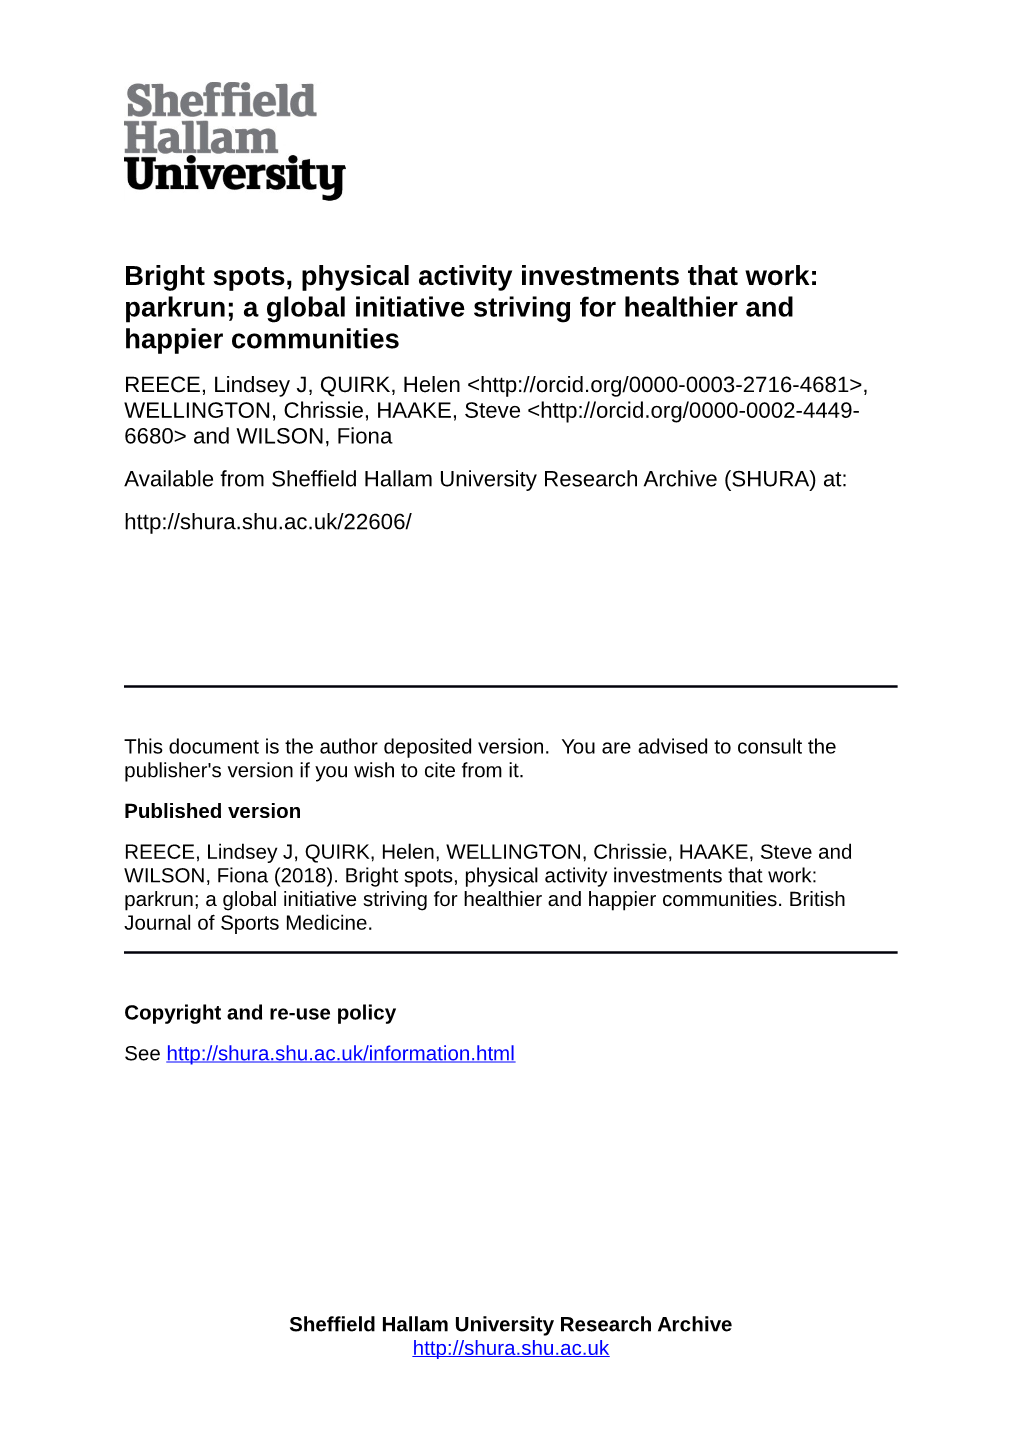 Bright Spots, Physical Activity Investments That Work: Parkrun; A